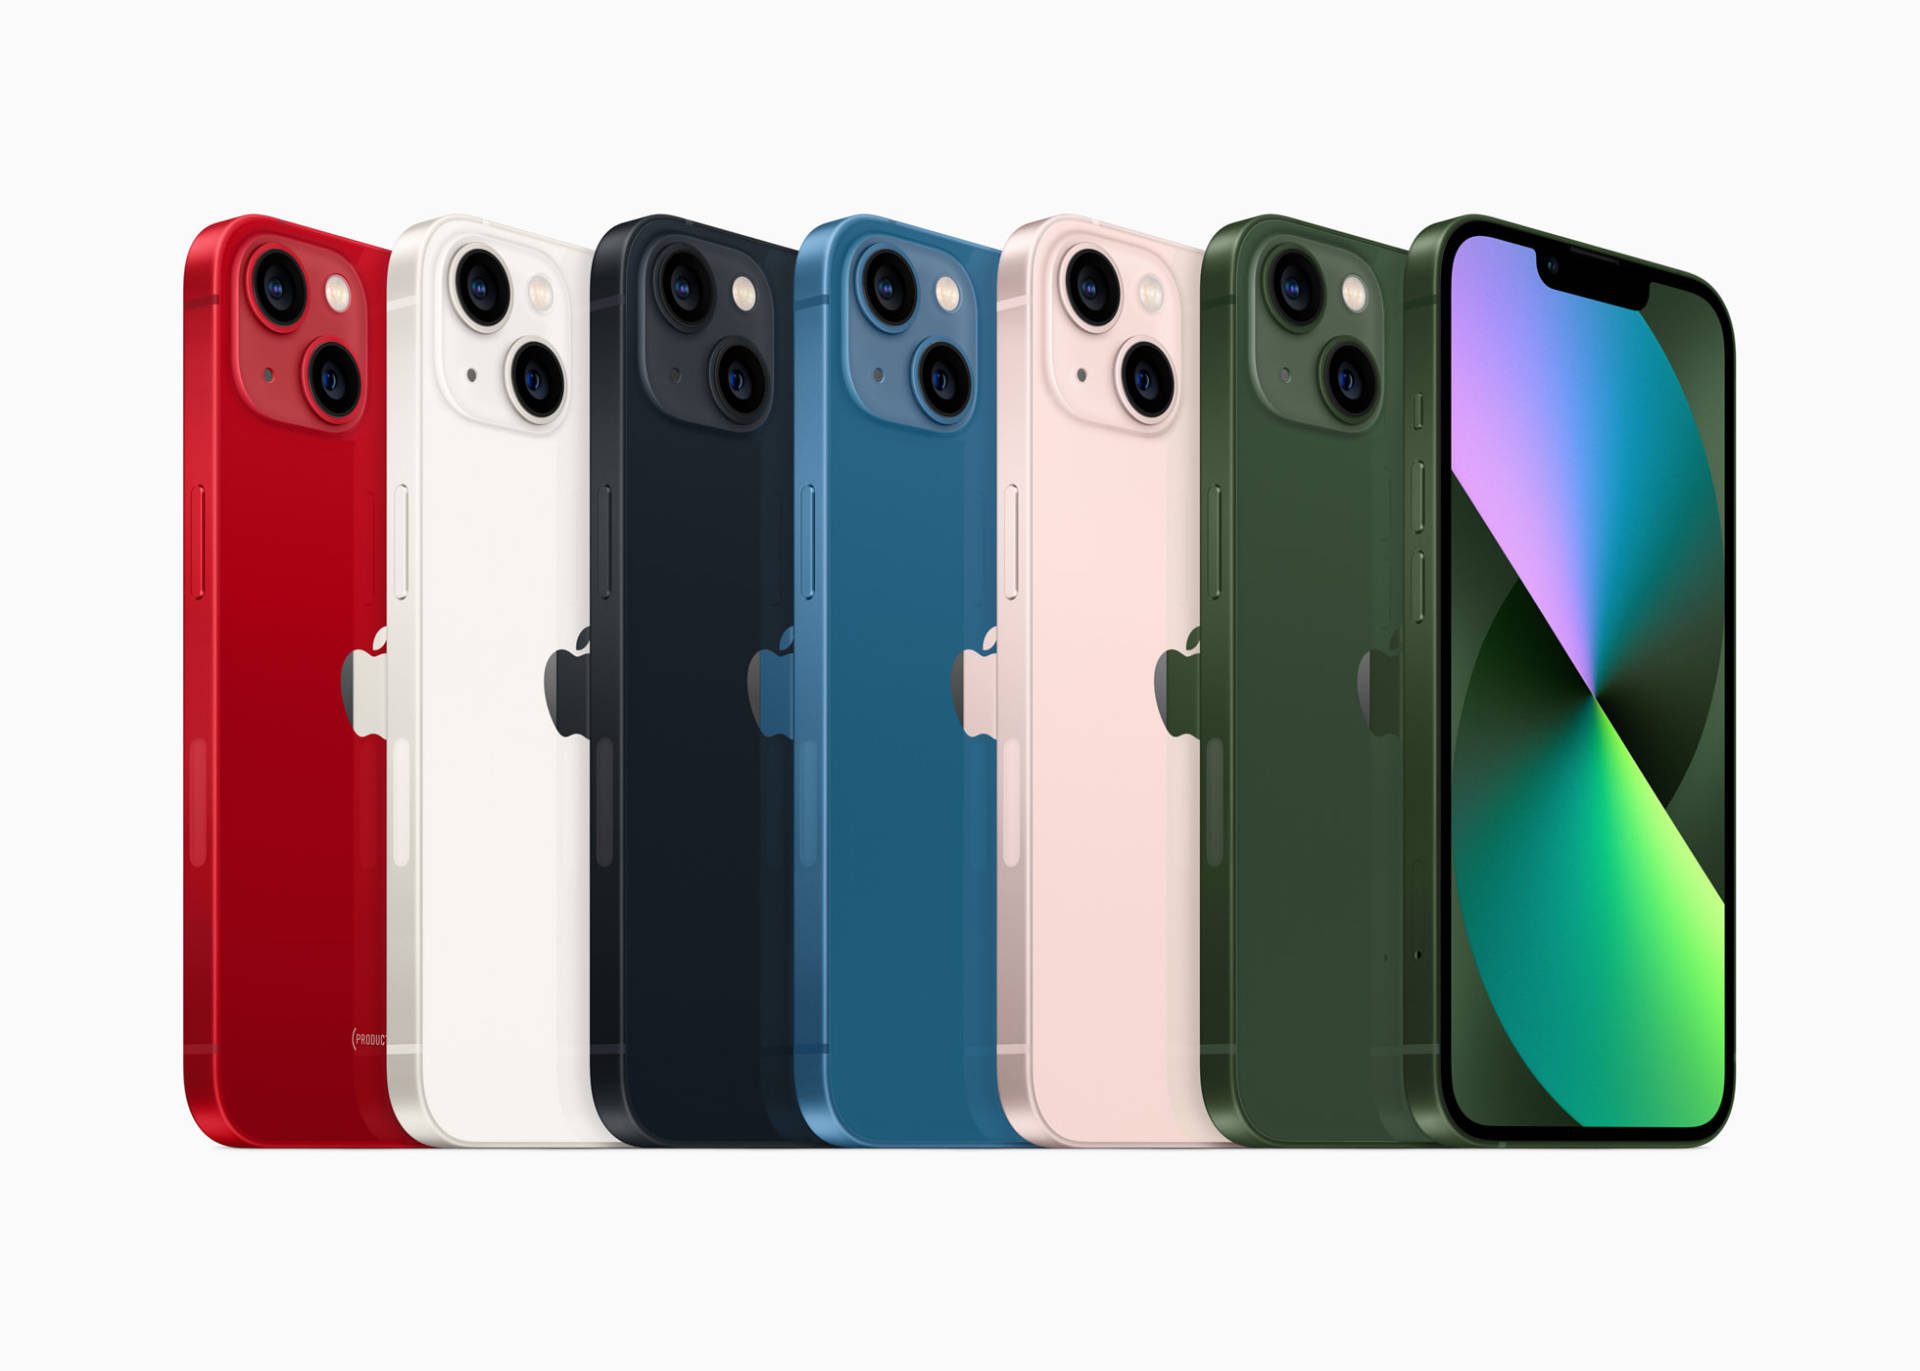 iPhone 13 vo farbách PRODUCT(RED), Starlight, Midnight, Blue, Pink a Green